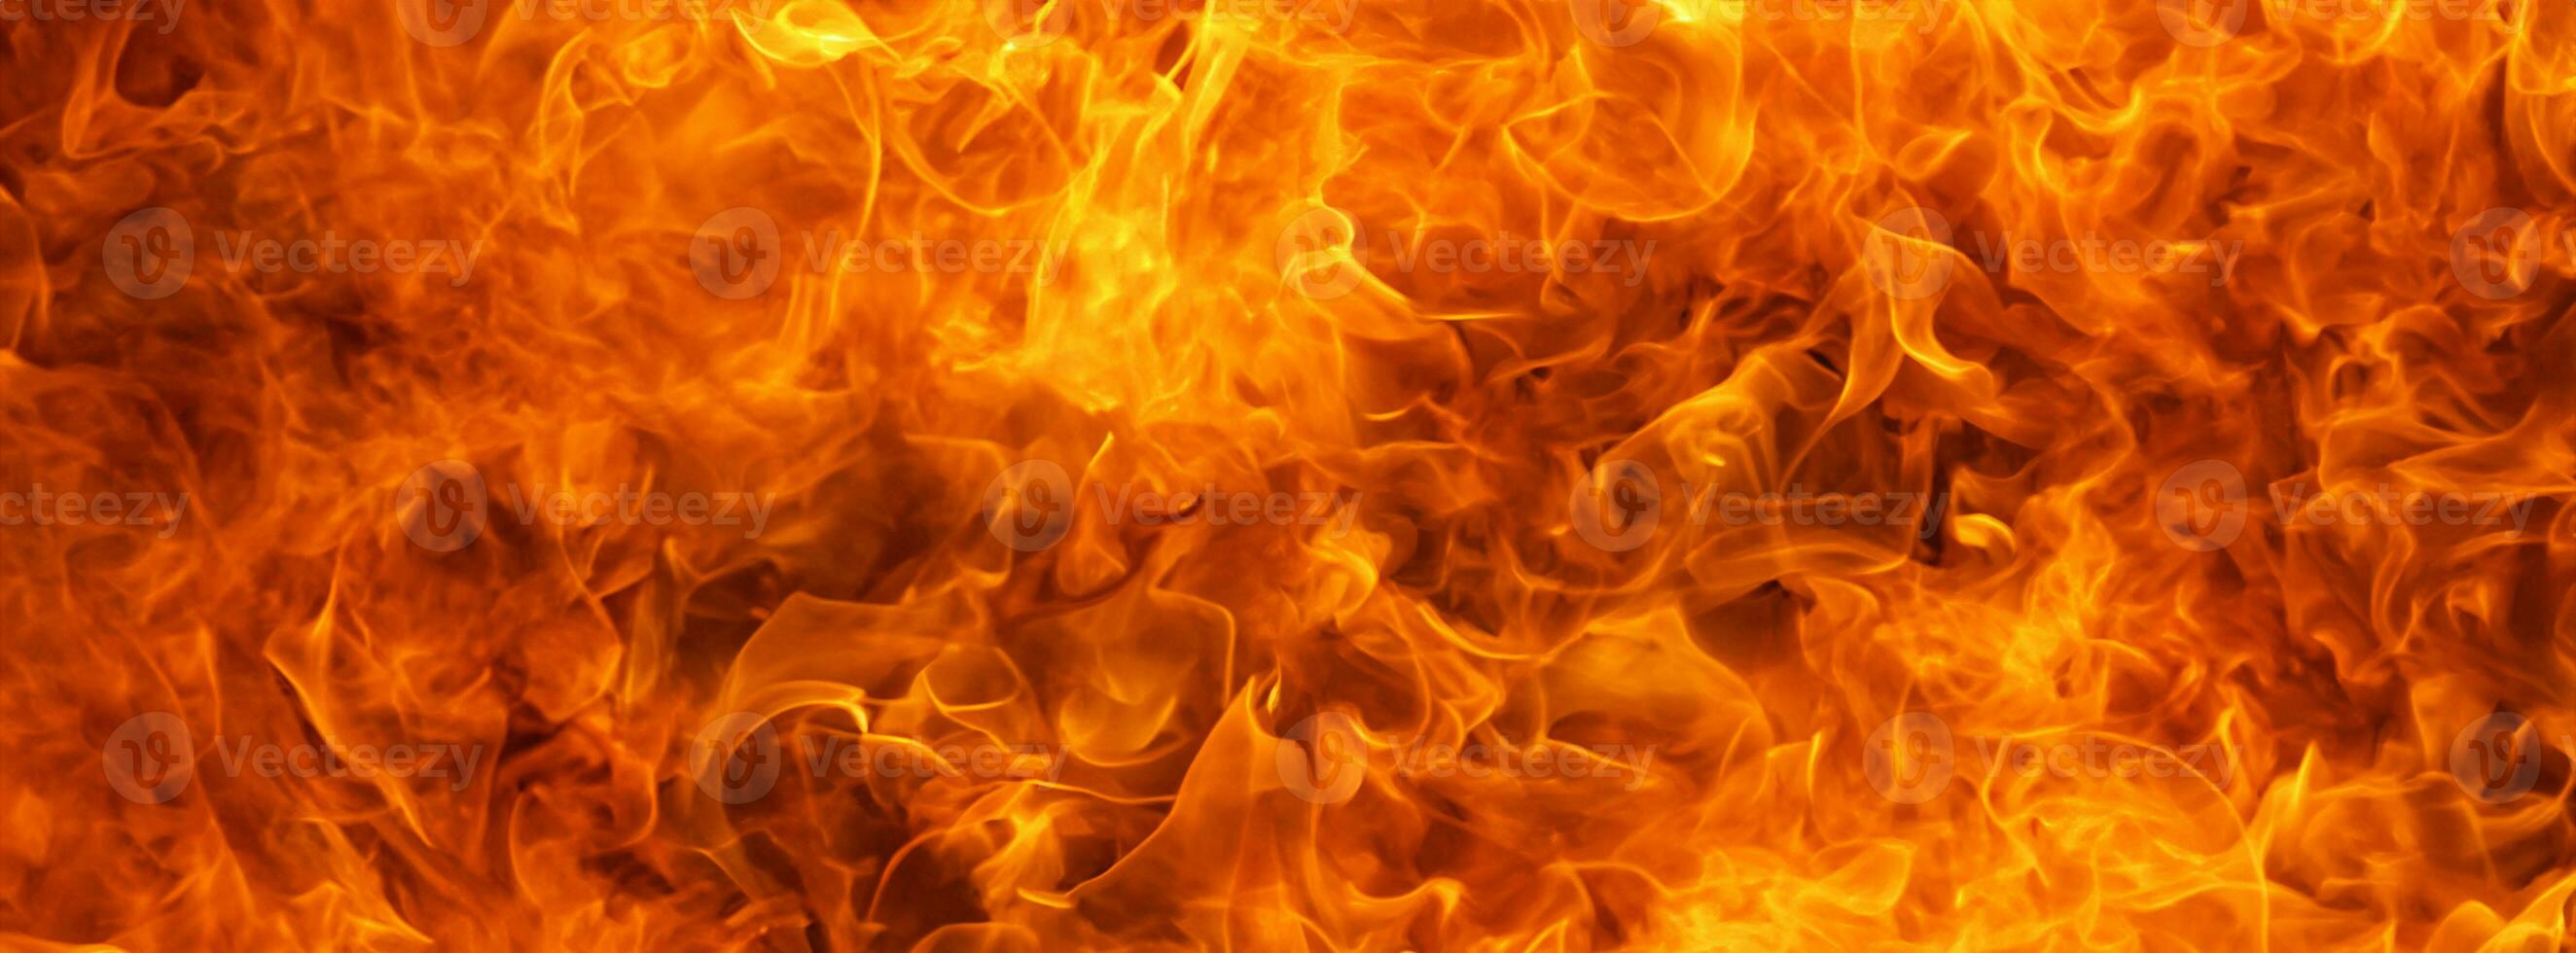 a close up of a fire with lots of flames photo